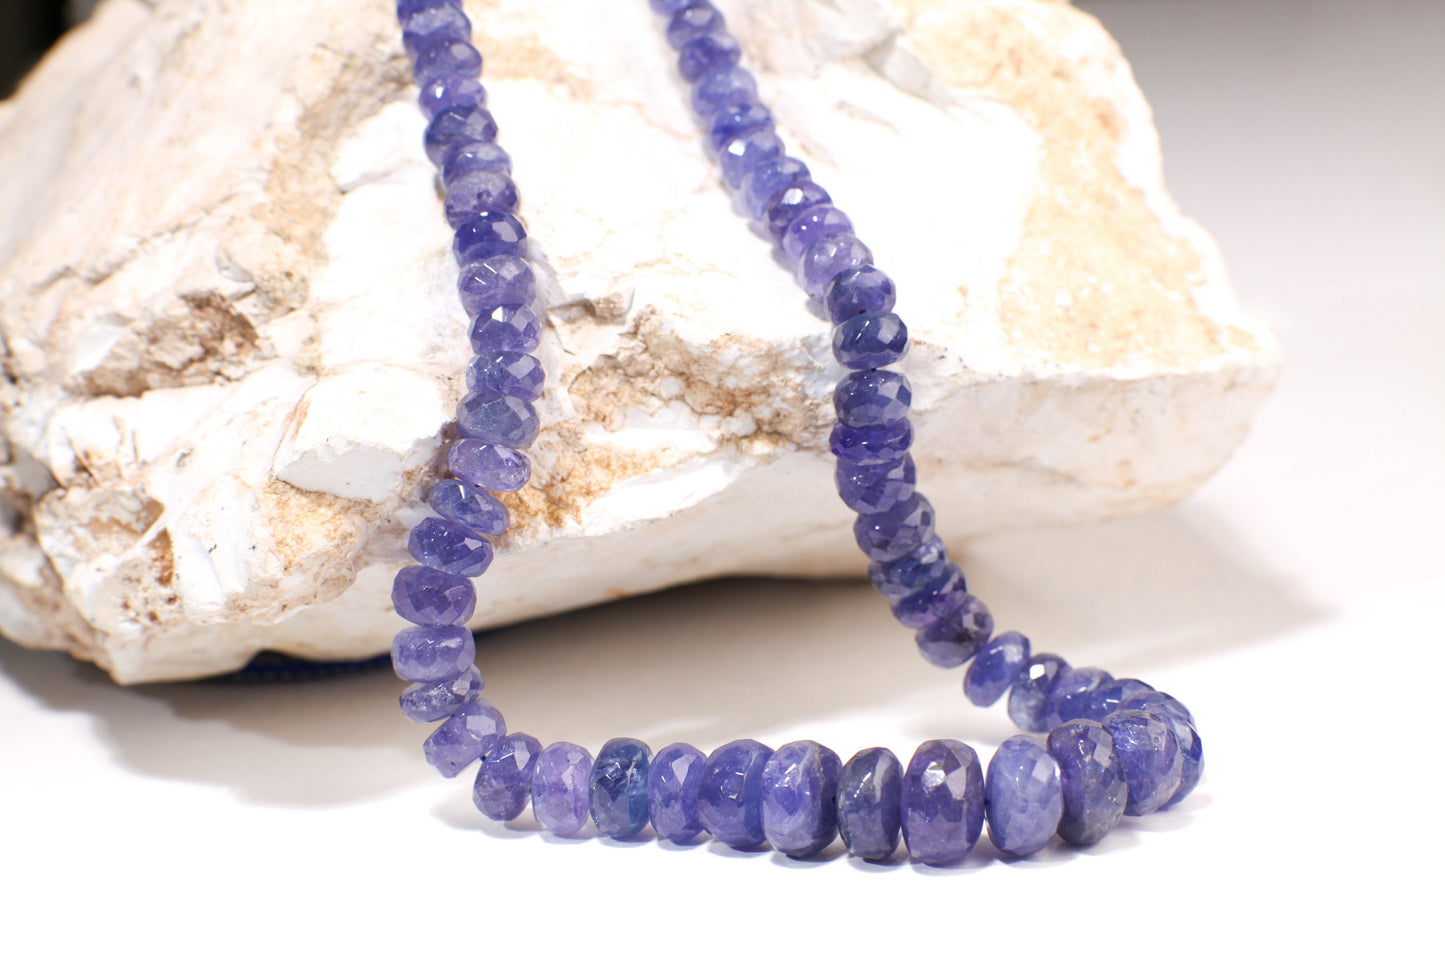 Natural Tanzanite Gemstone Large Size Graduated 6-12mm Rare Faceted Roundel, AAA quality Adjustable Thread Necklace 19"